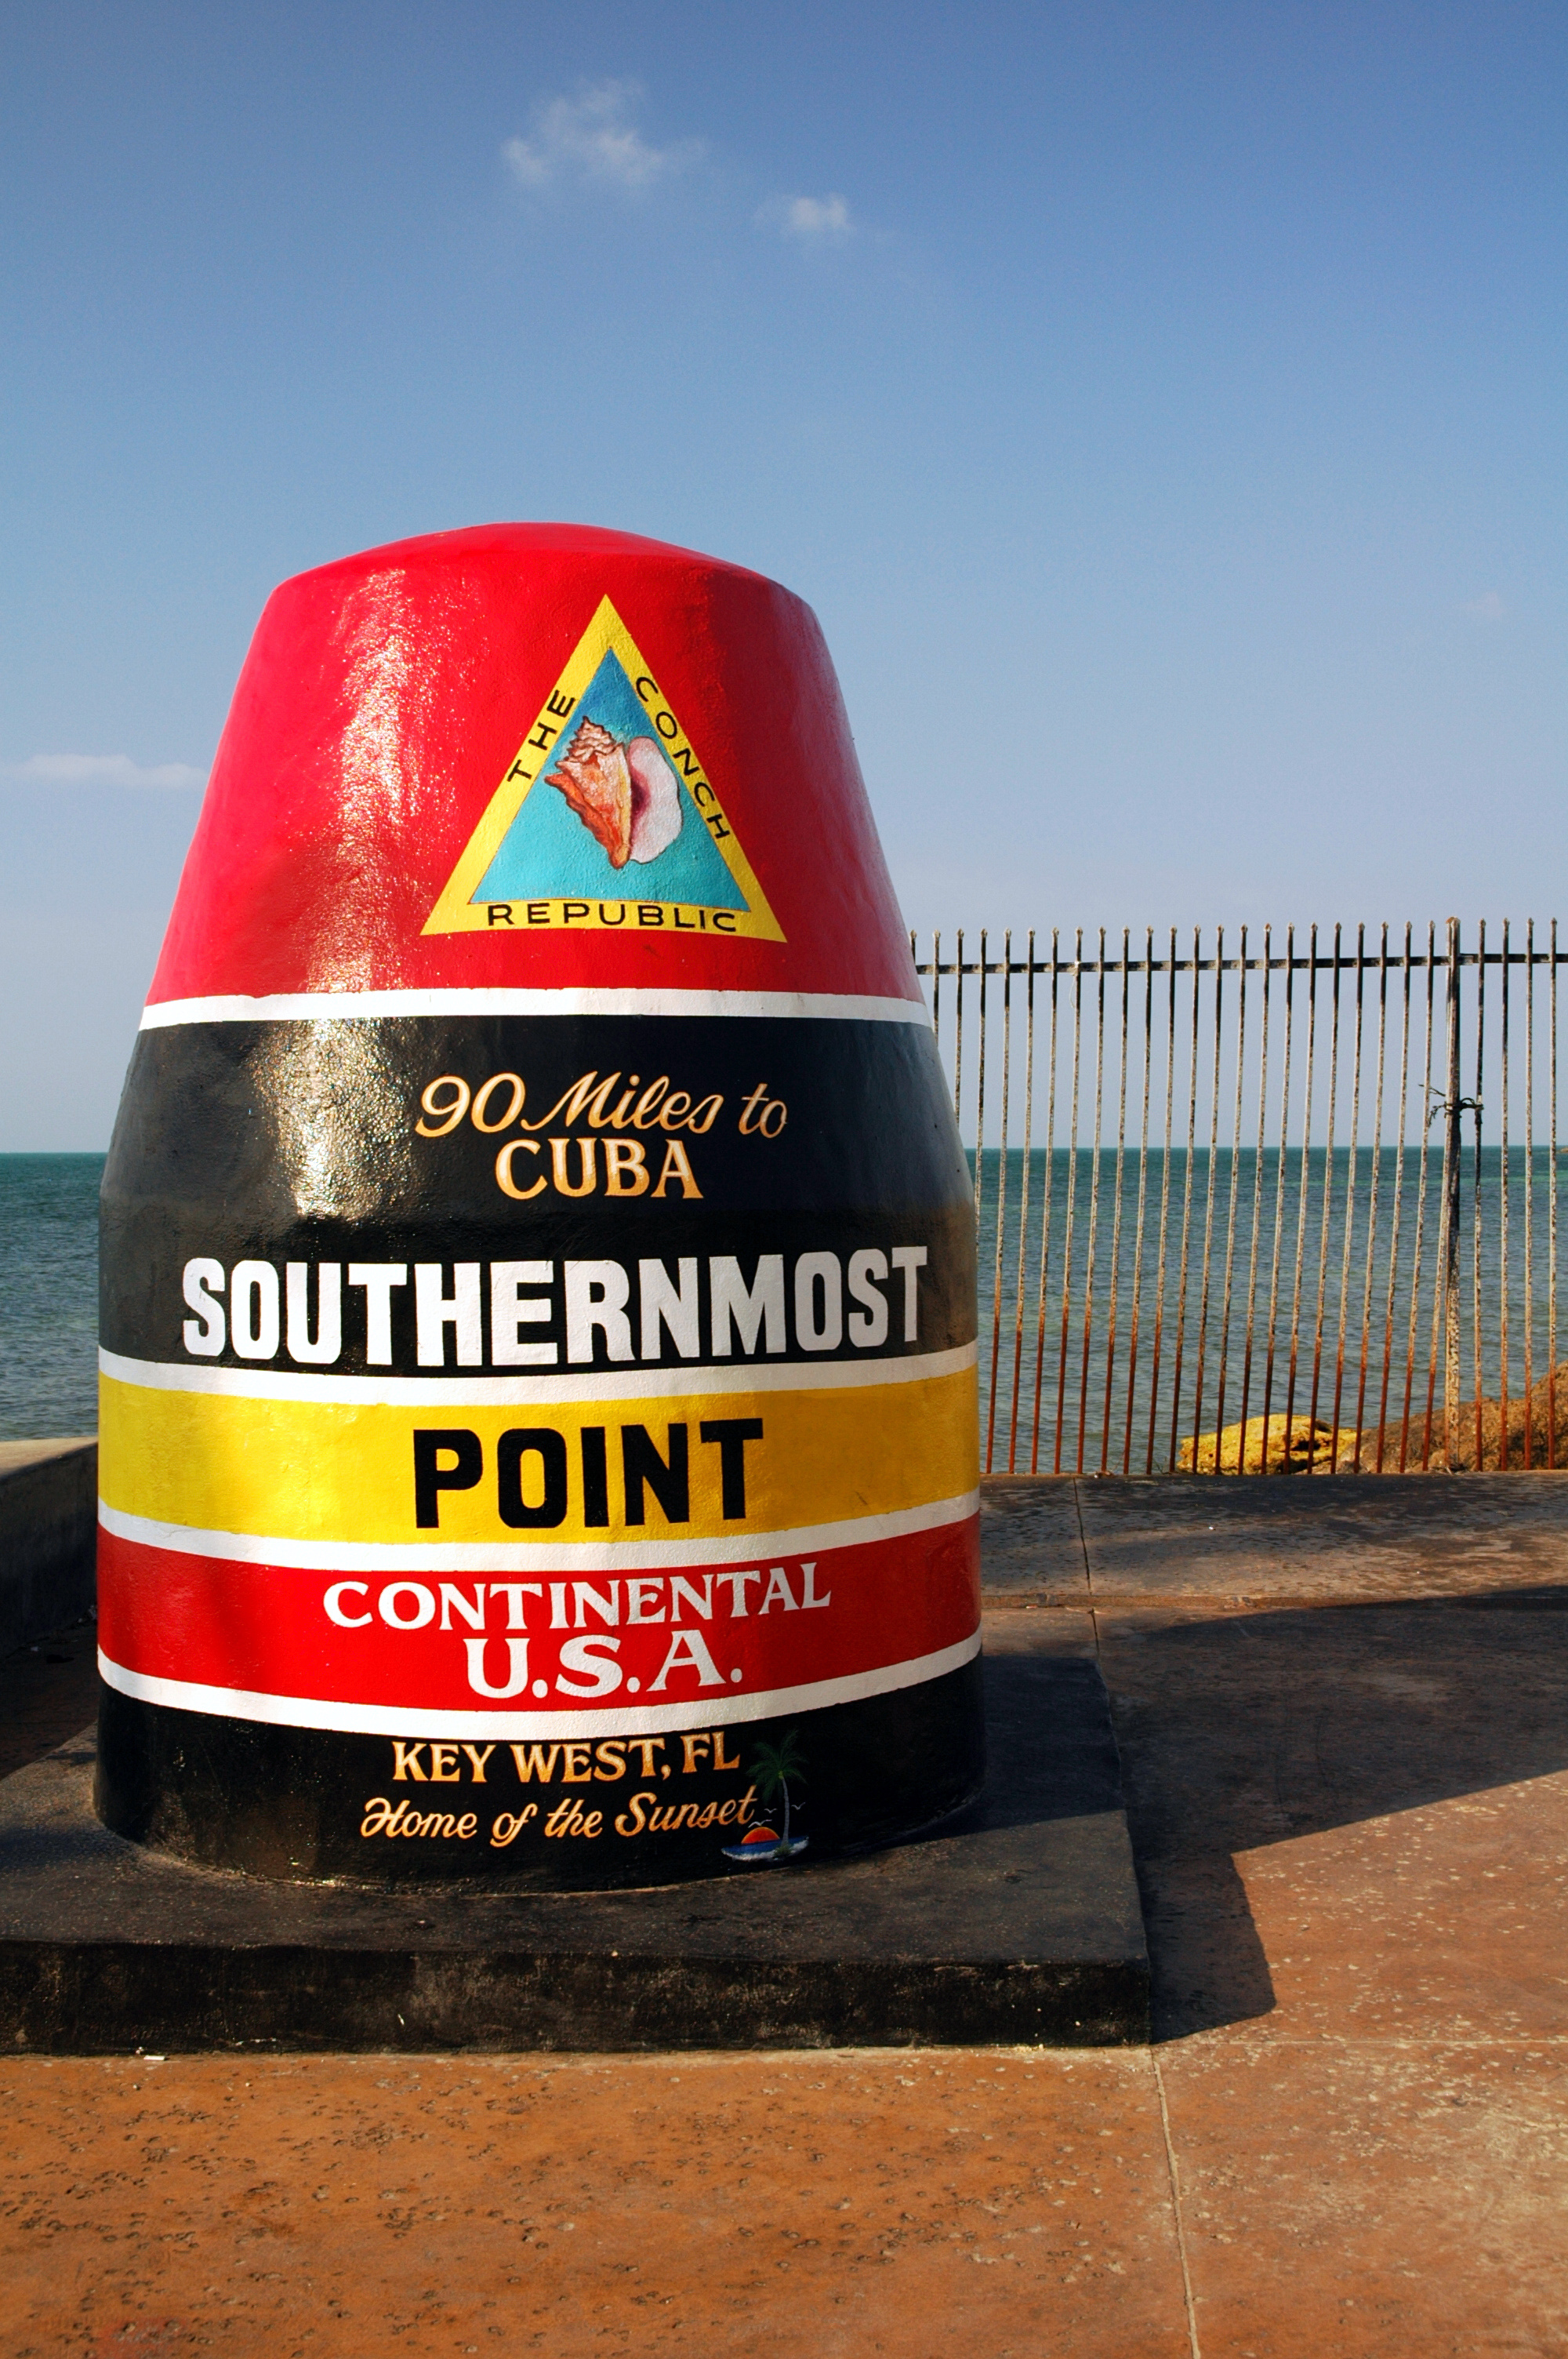 Erected in 1983, the Southernmost Point buoy is located at the intersection of South Street and Whitehead Street in Key West, Florida and is one of the most photographed attractions in the area.